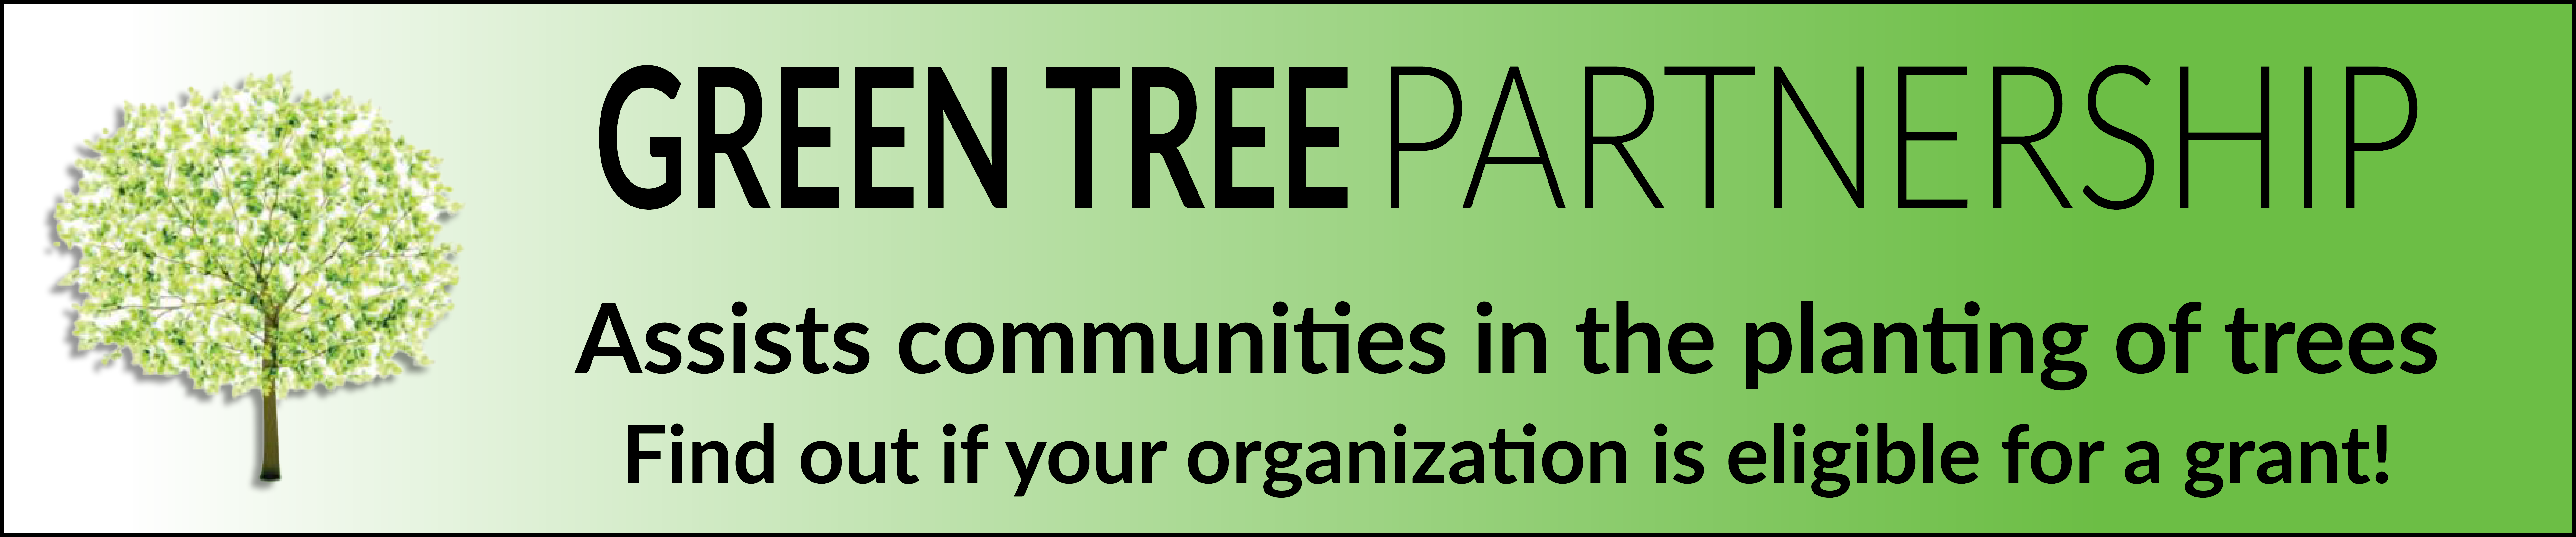 The Green Tree Partnership assists communities in planting trees. Click here to learn more. 